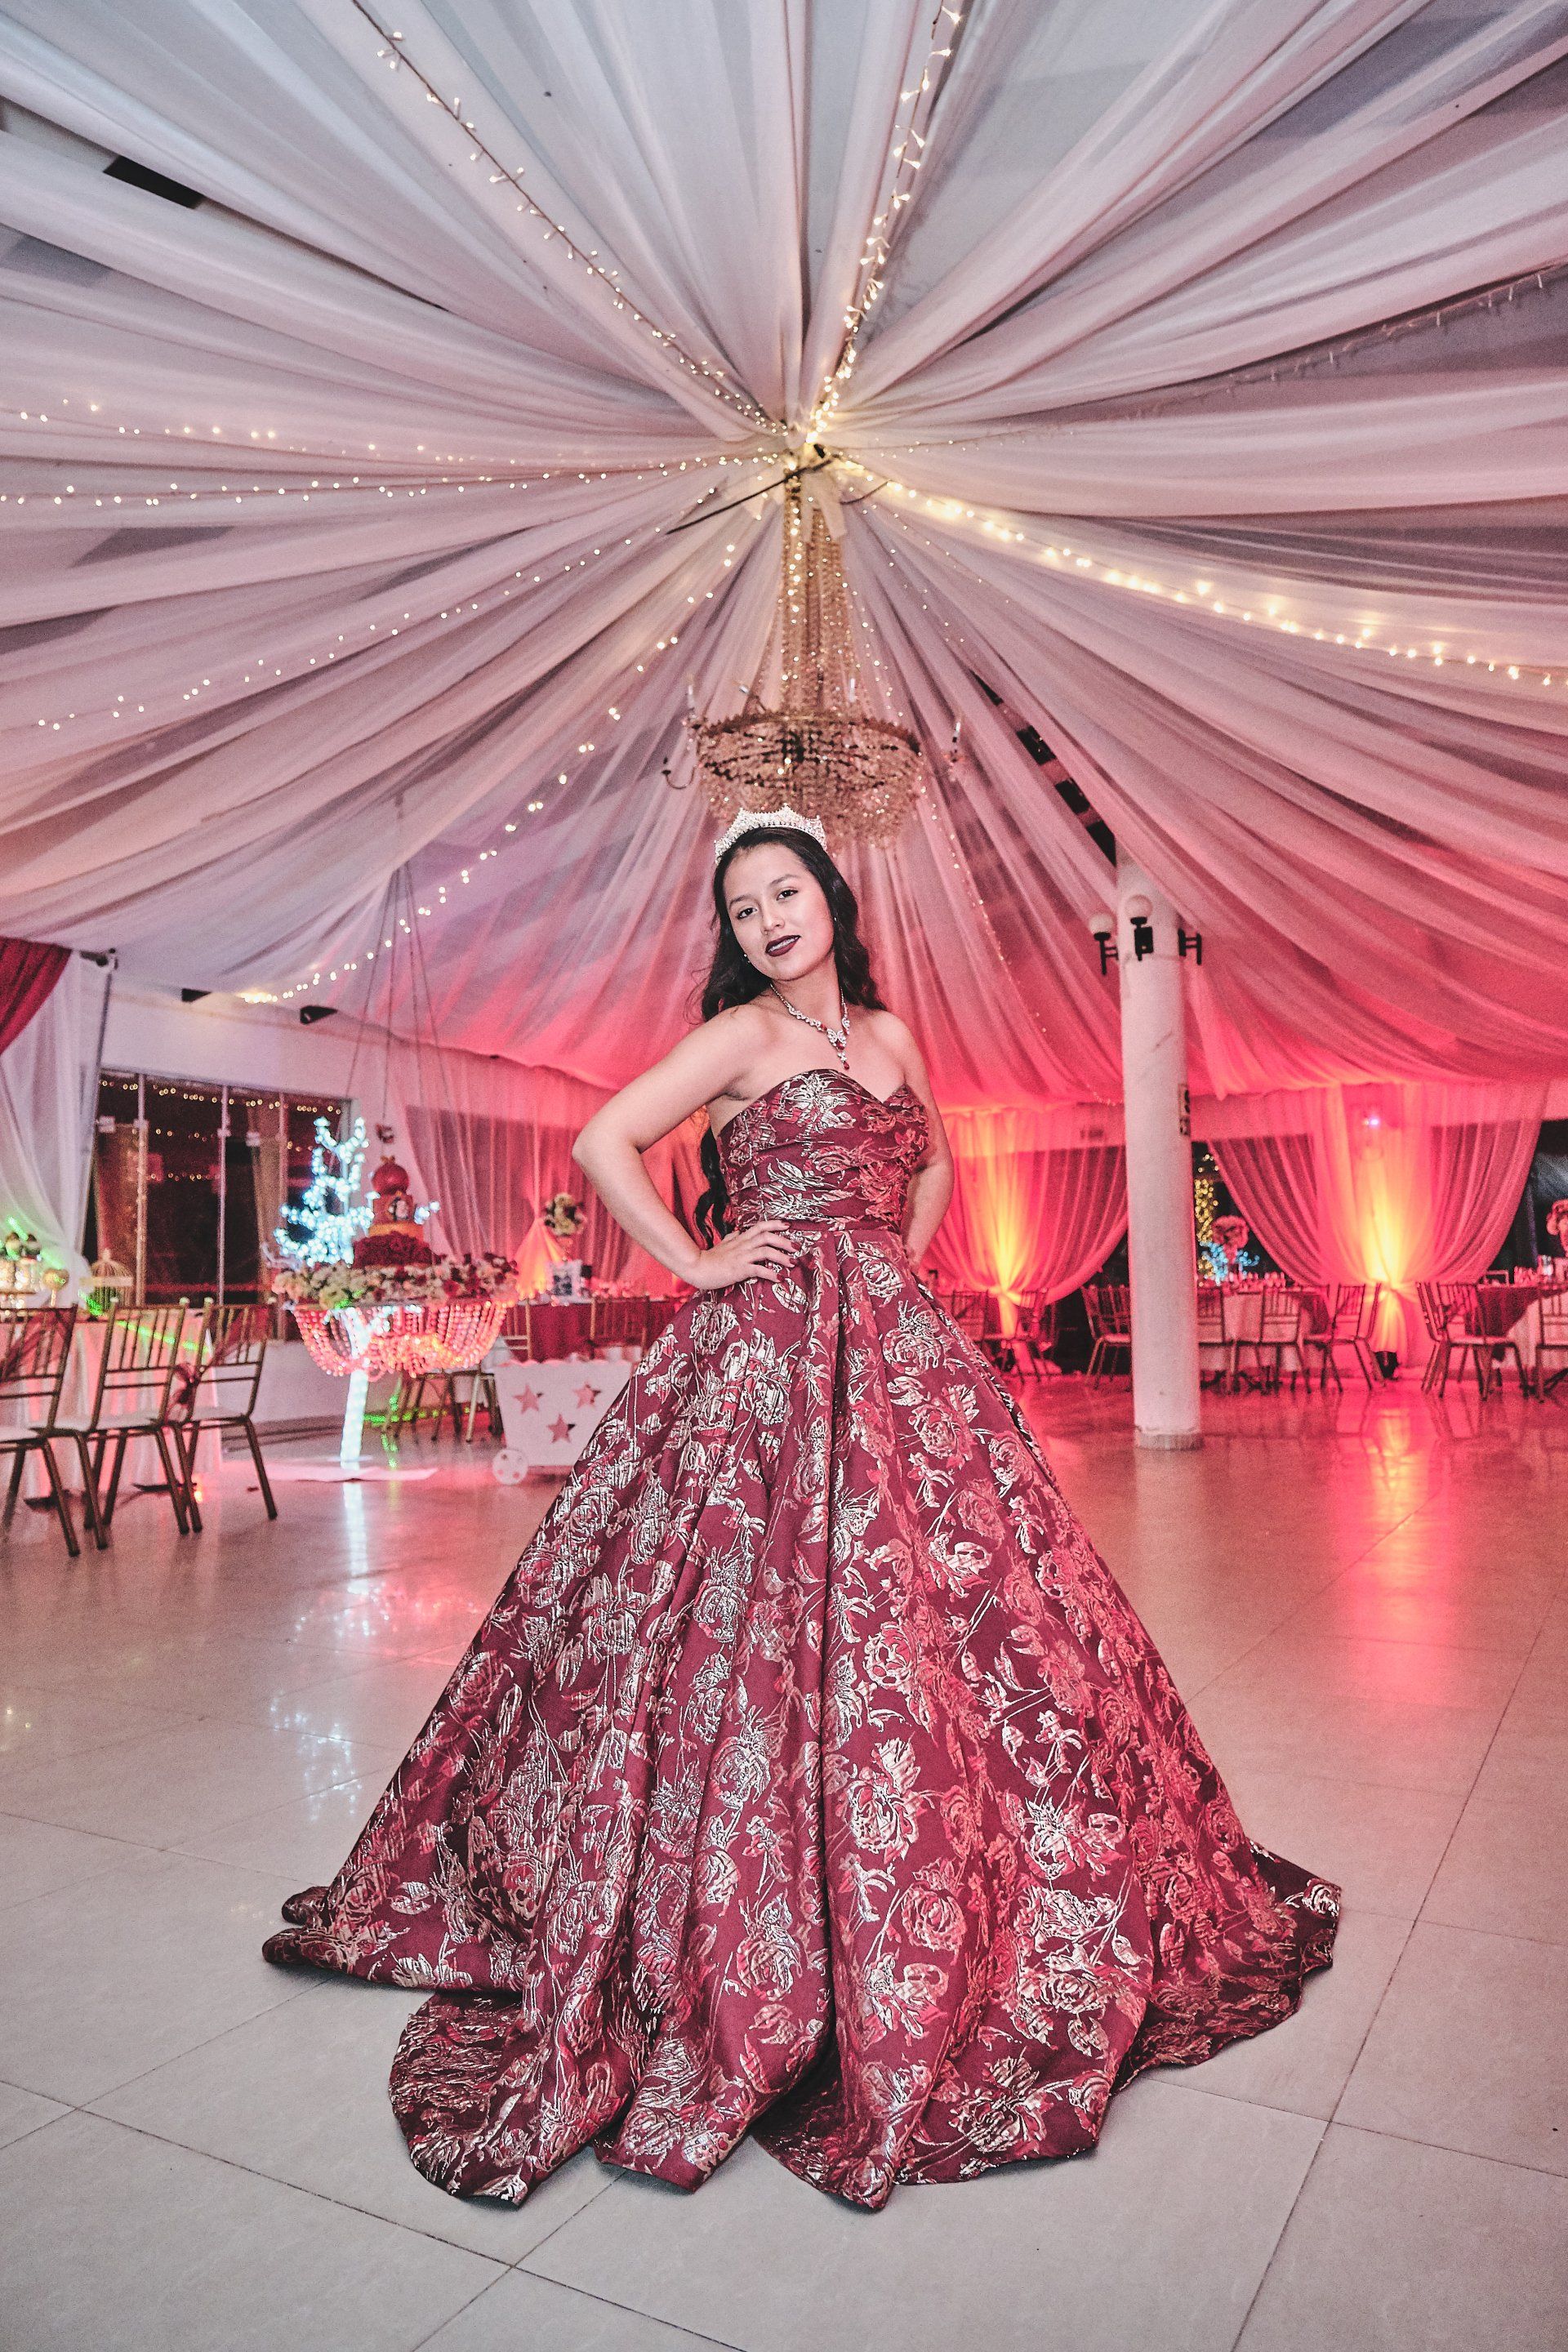 A Quinceanera Celebration in Mansfield, Texas was made better with a Flash Party Photo Booth Rental.